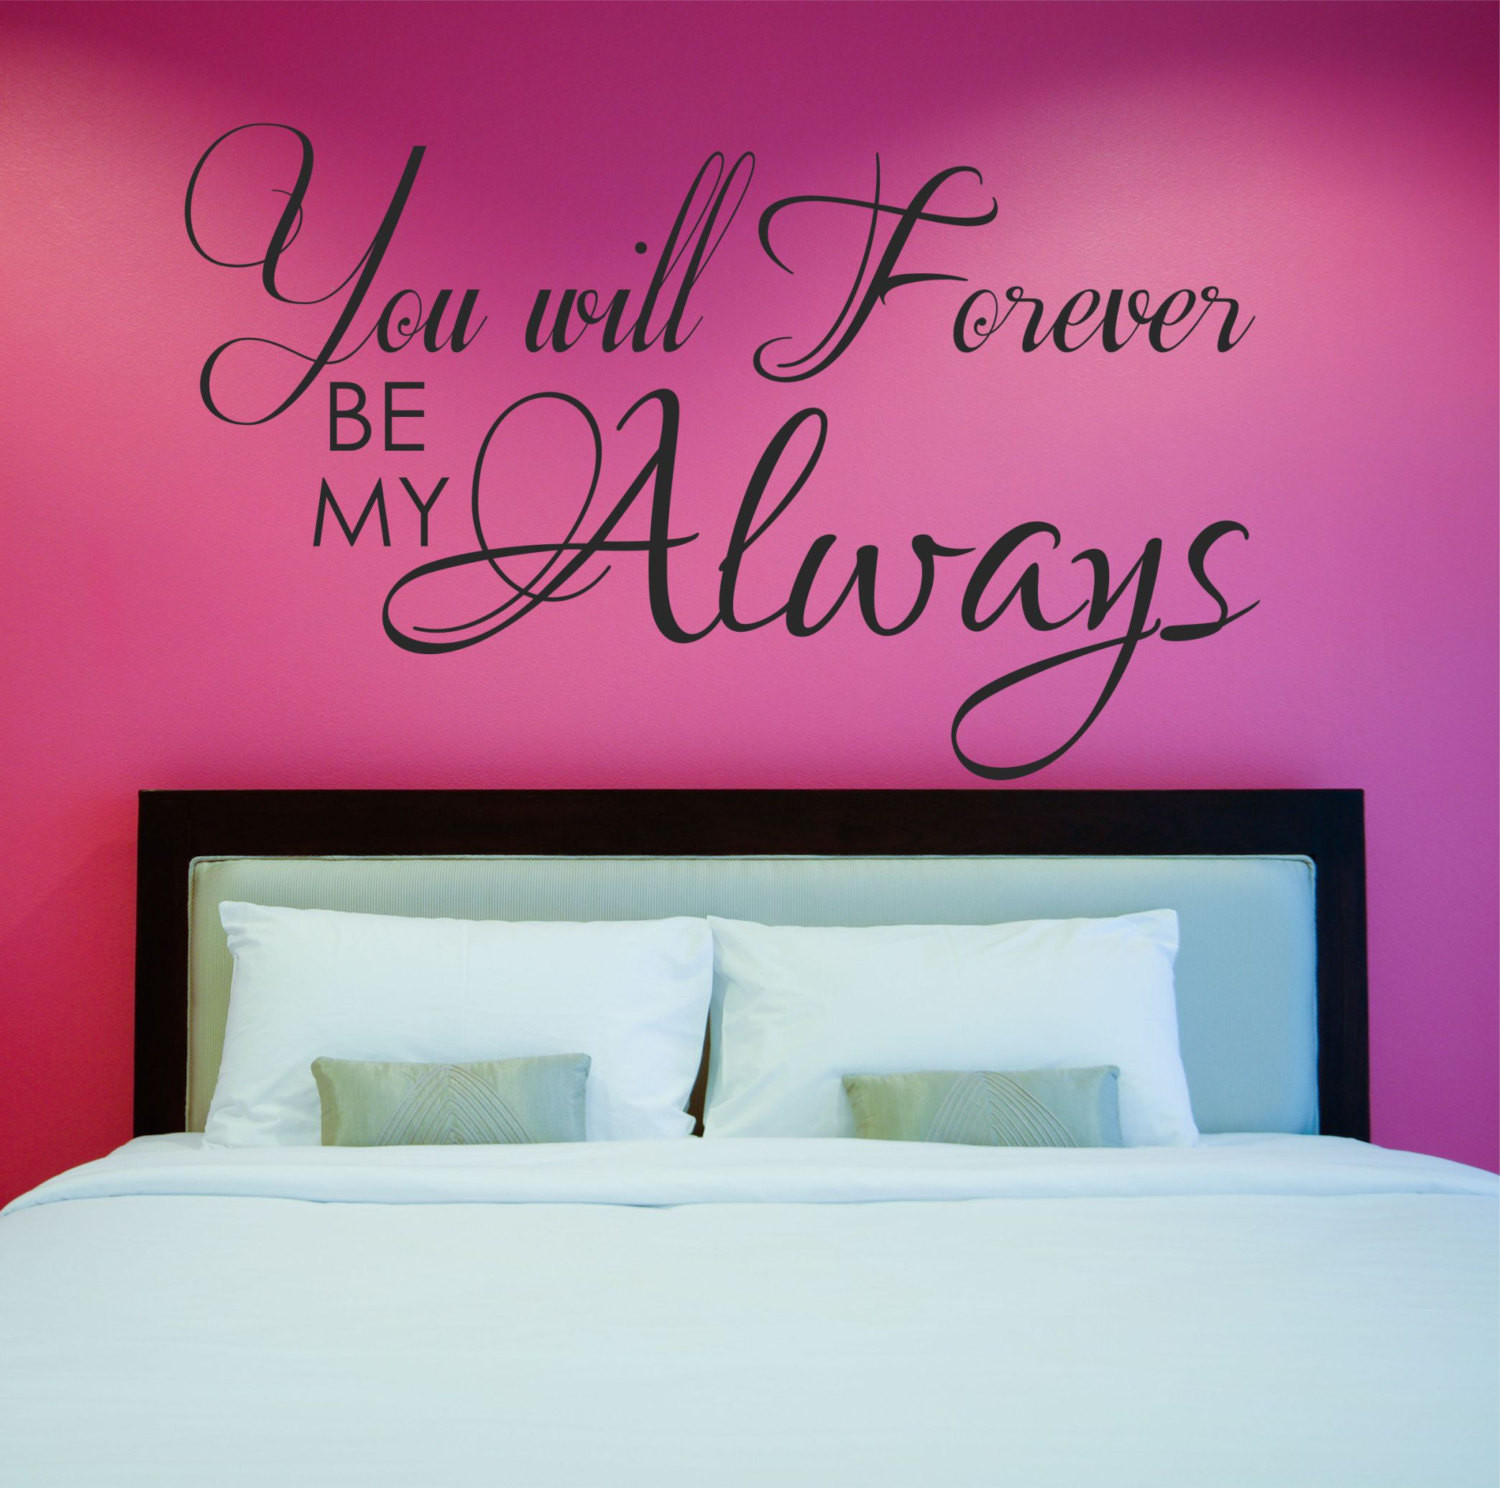 Master Bedroom Wall Decals
 Love Quote Decal Master Bedroom Wall Decal Vinyl Wall Quote